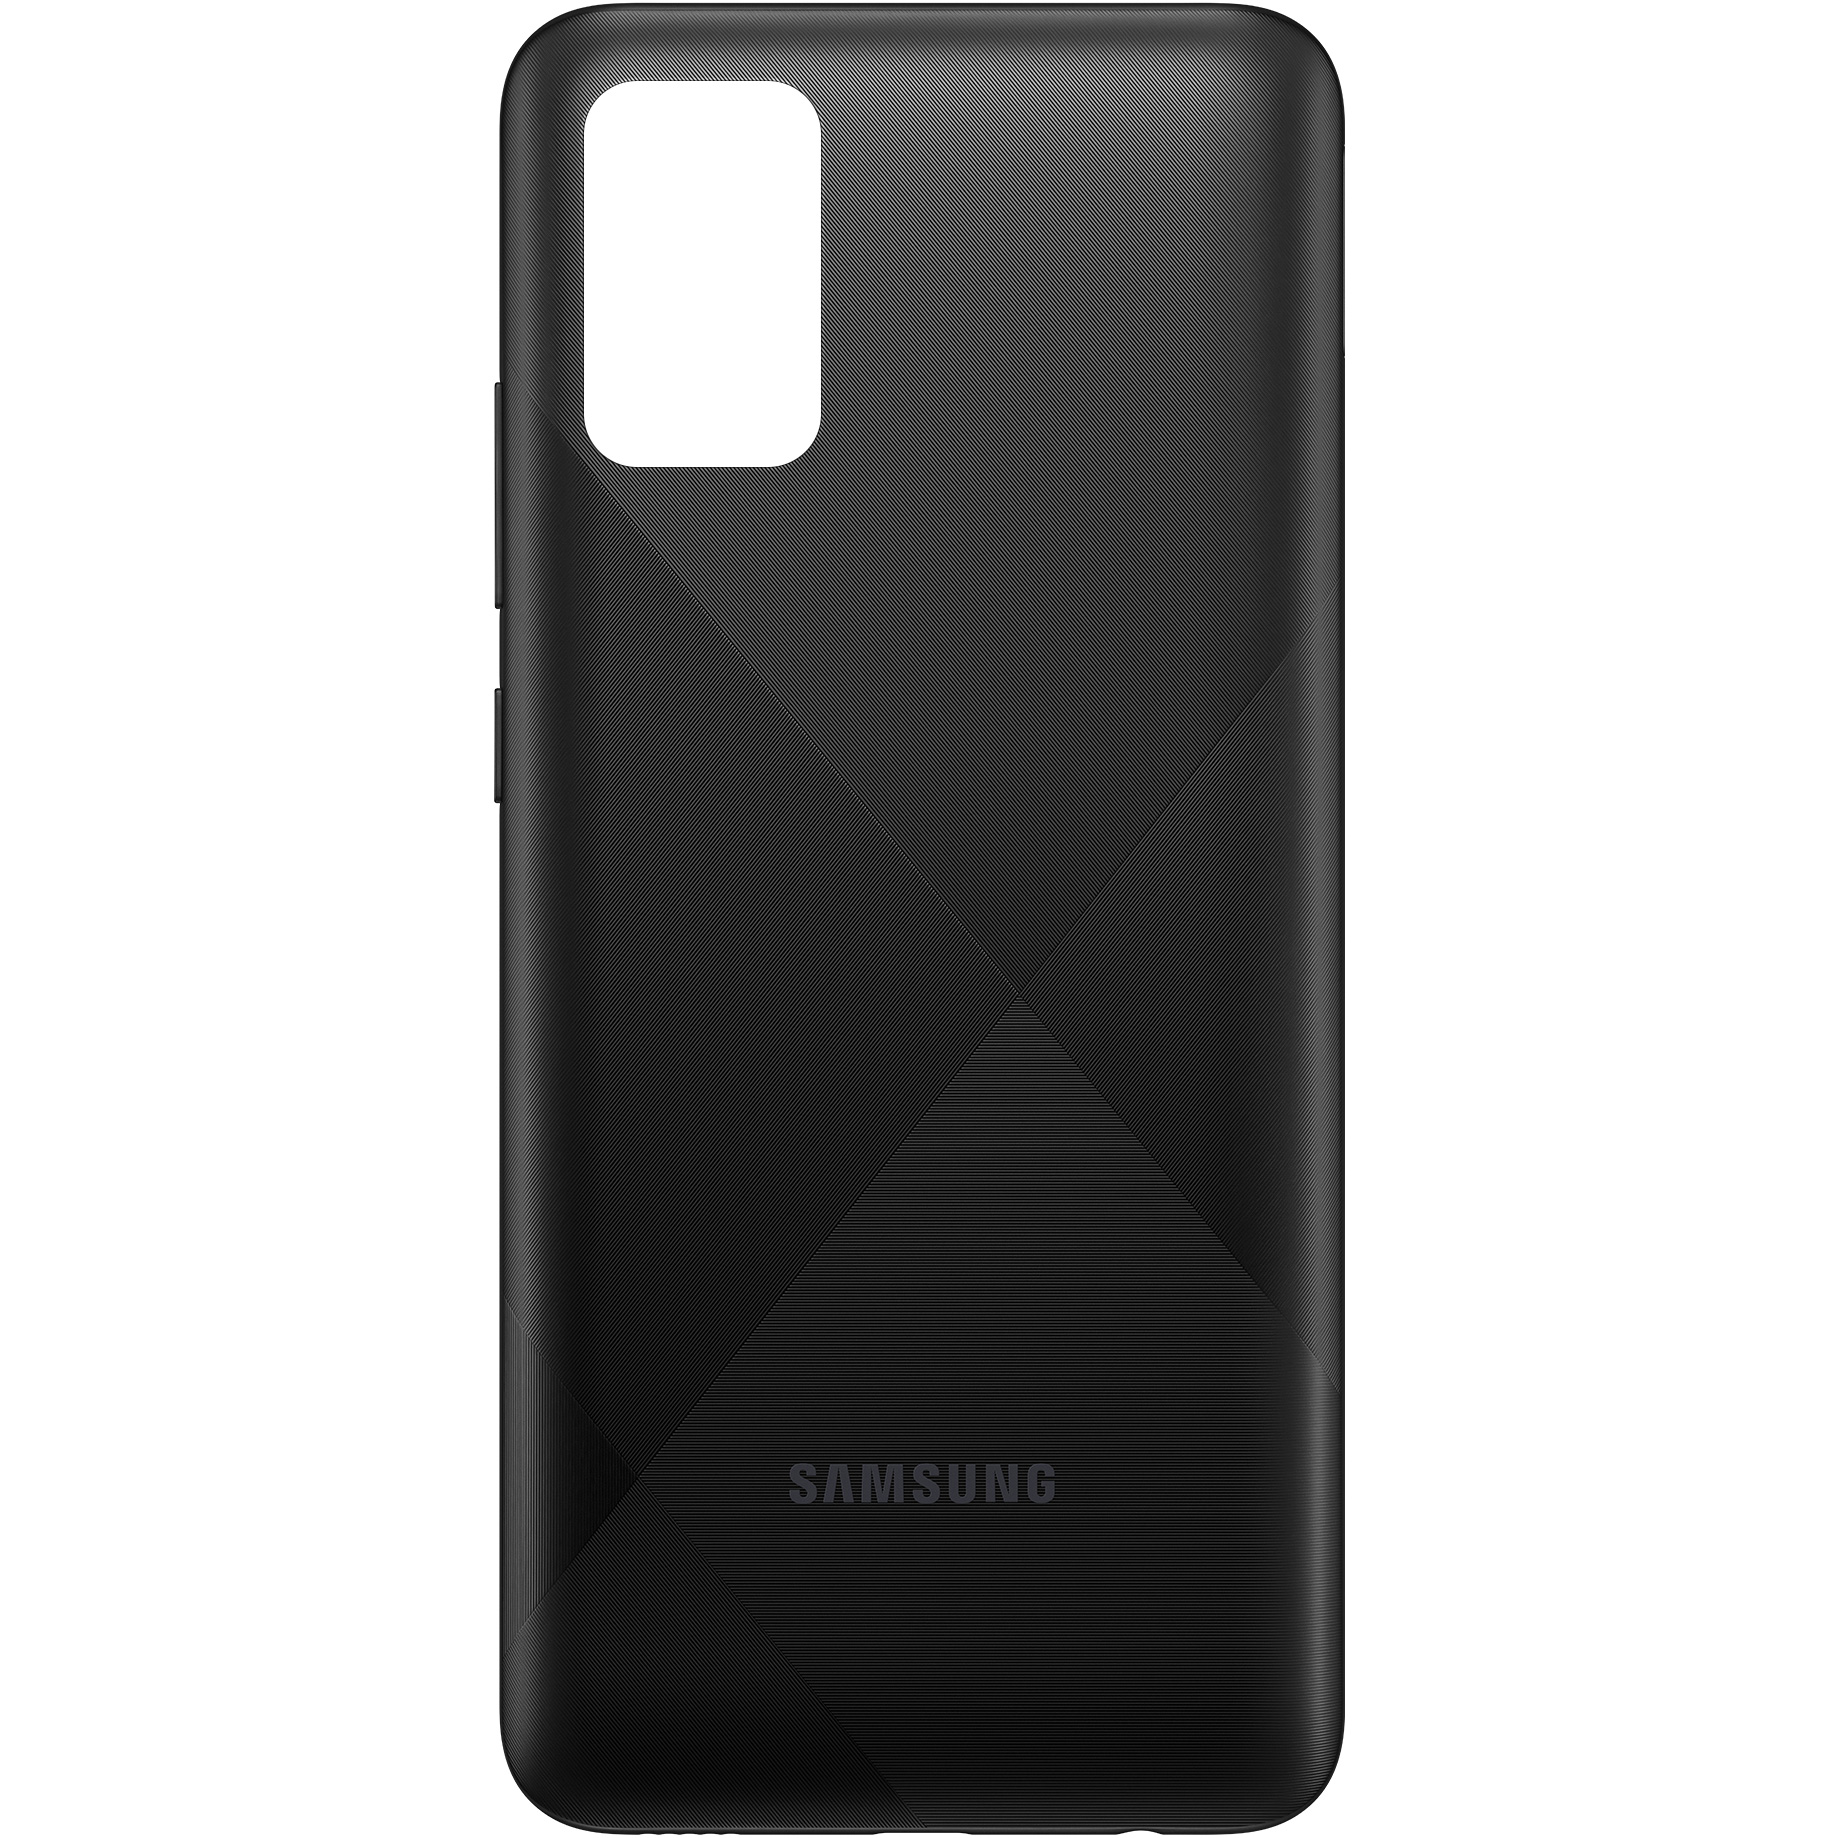 battery-cover-for-samsung-galaxy-a02s-a025f-black-gh81-20239a